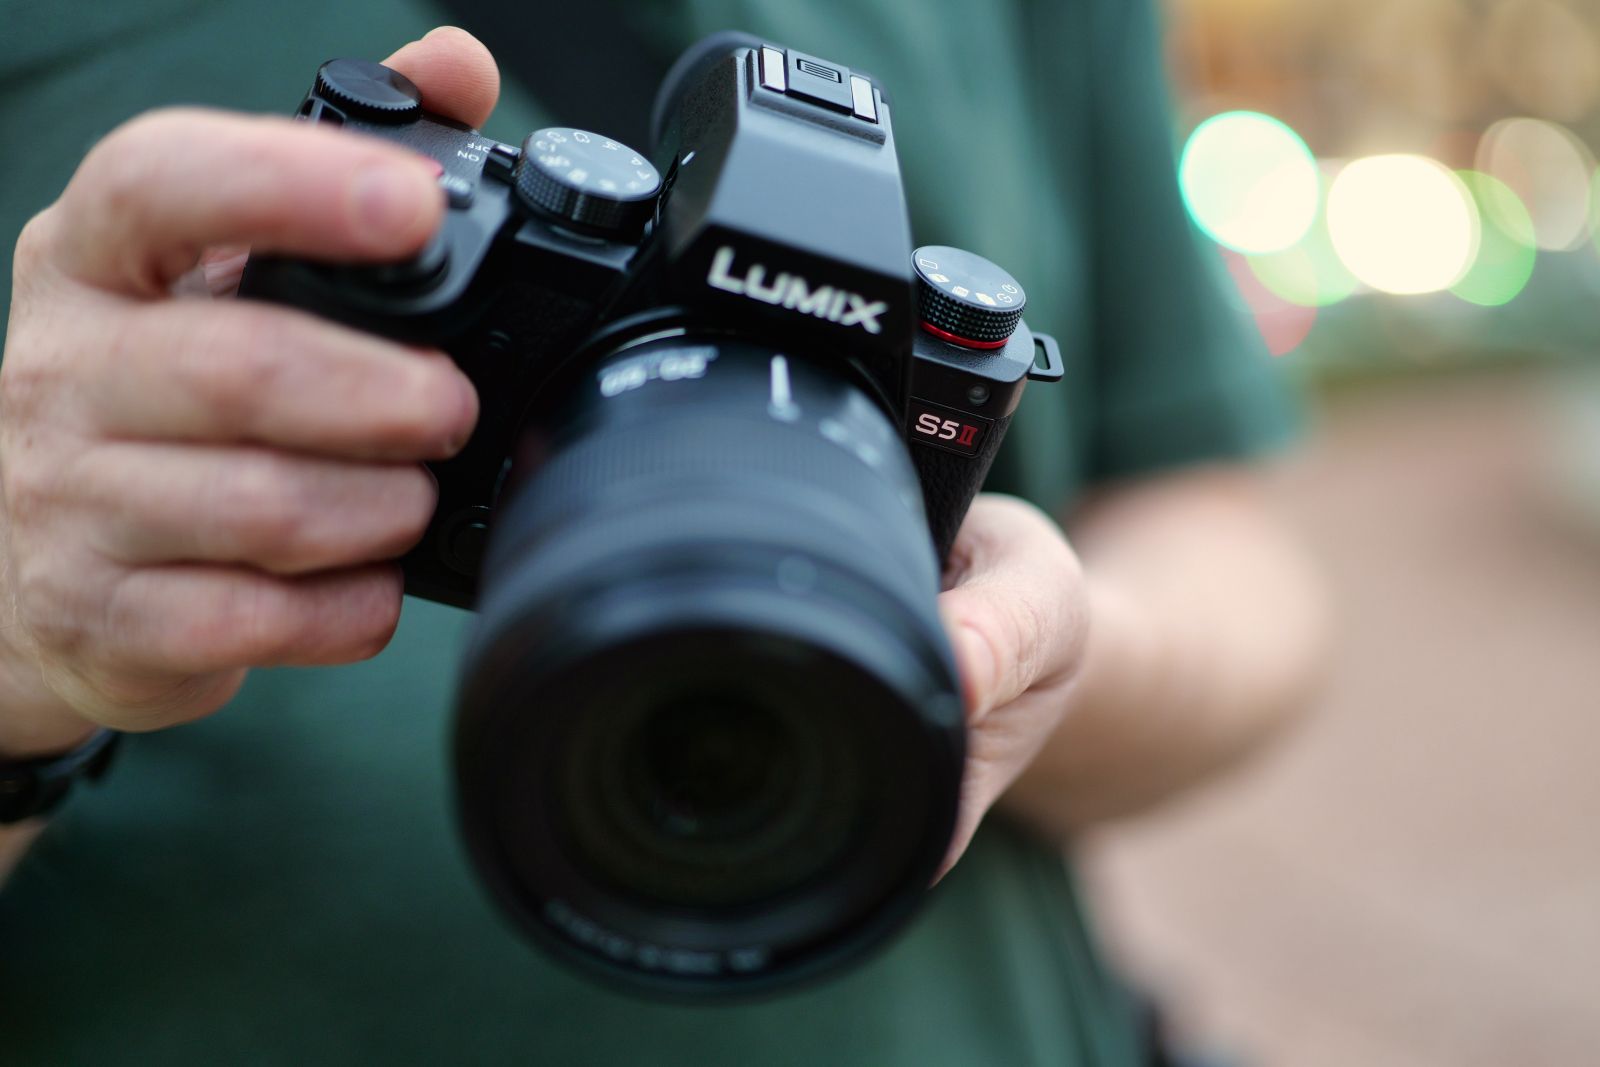 Panasonic Lumix S5IIX vs S5II: Which camera is right for you?